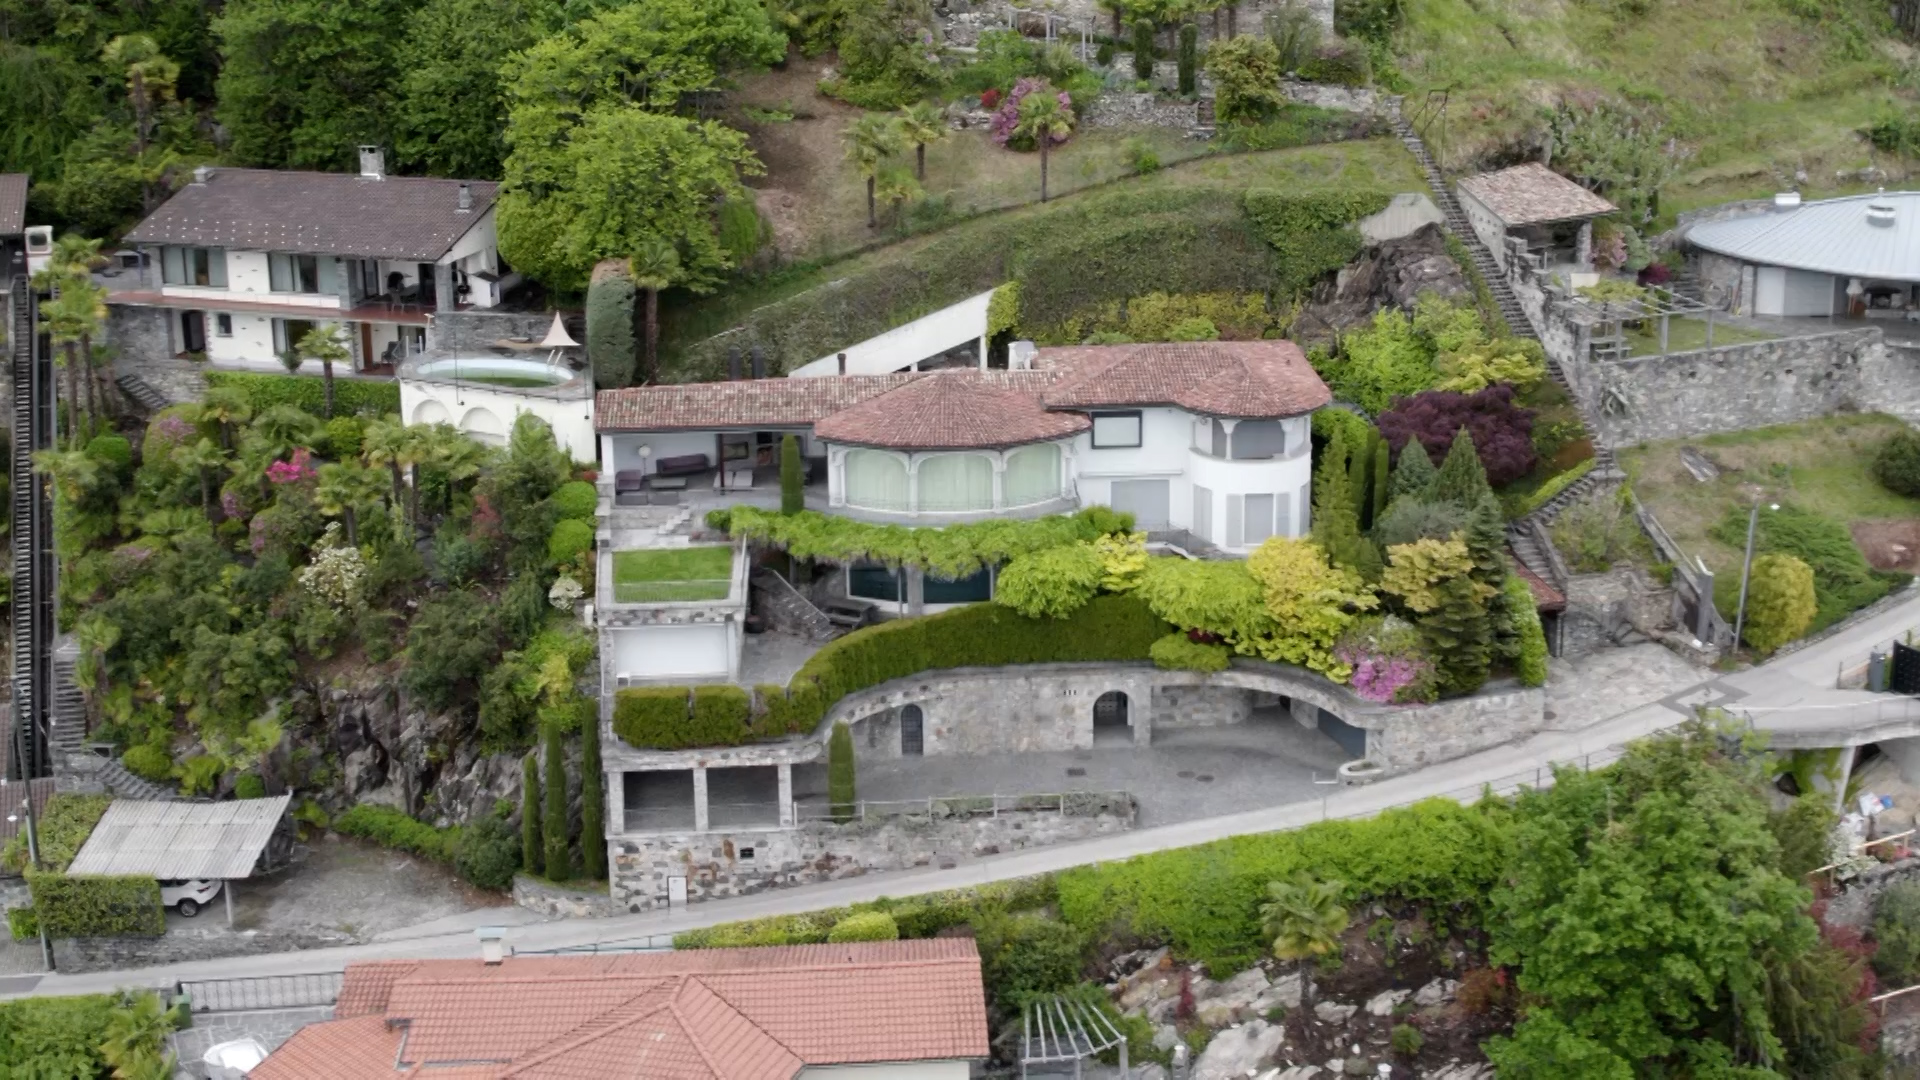 Holiday home in Ticino of Russian oligarch, now sanctioned